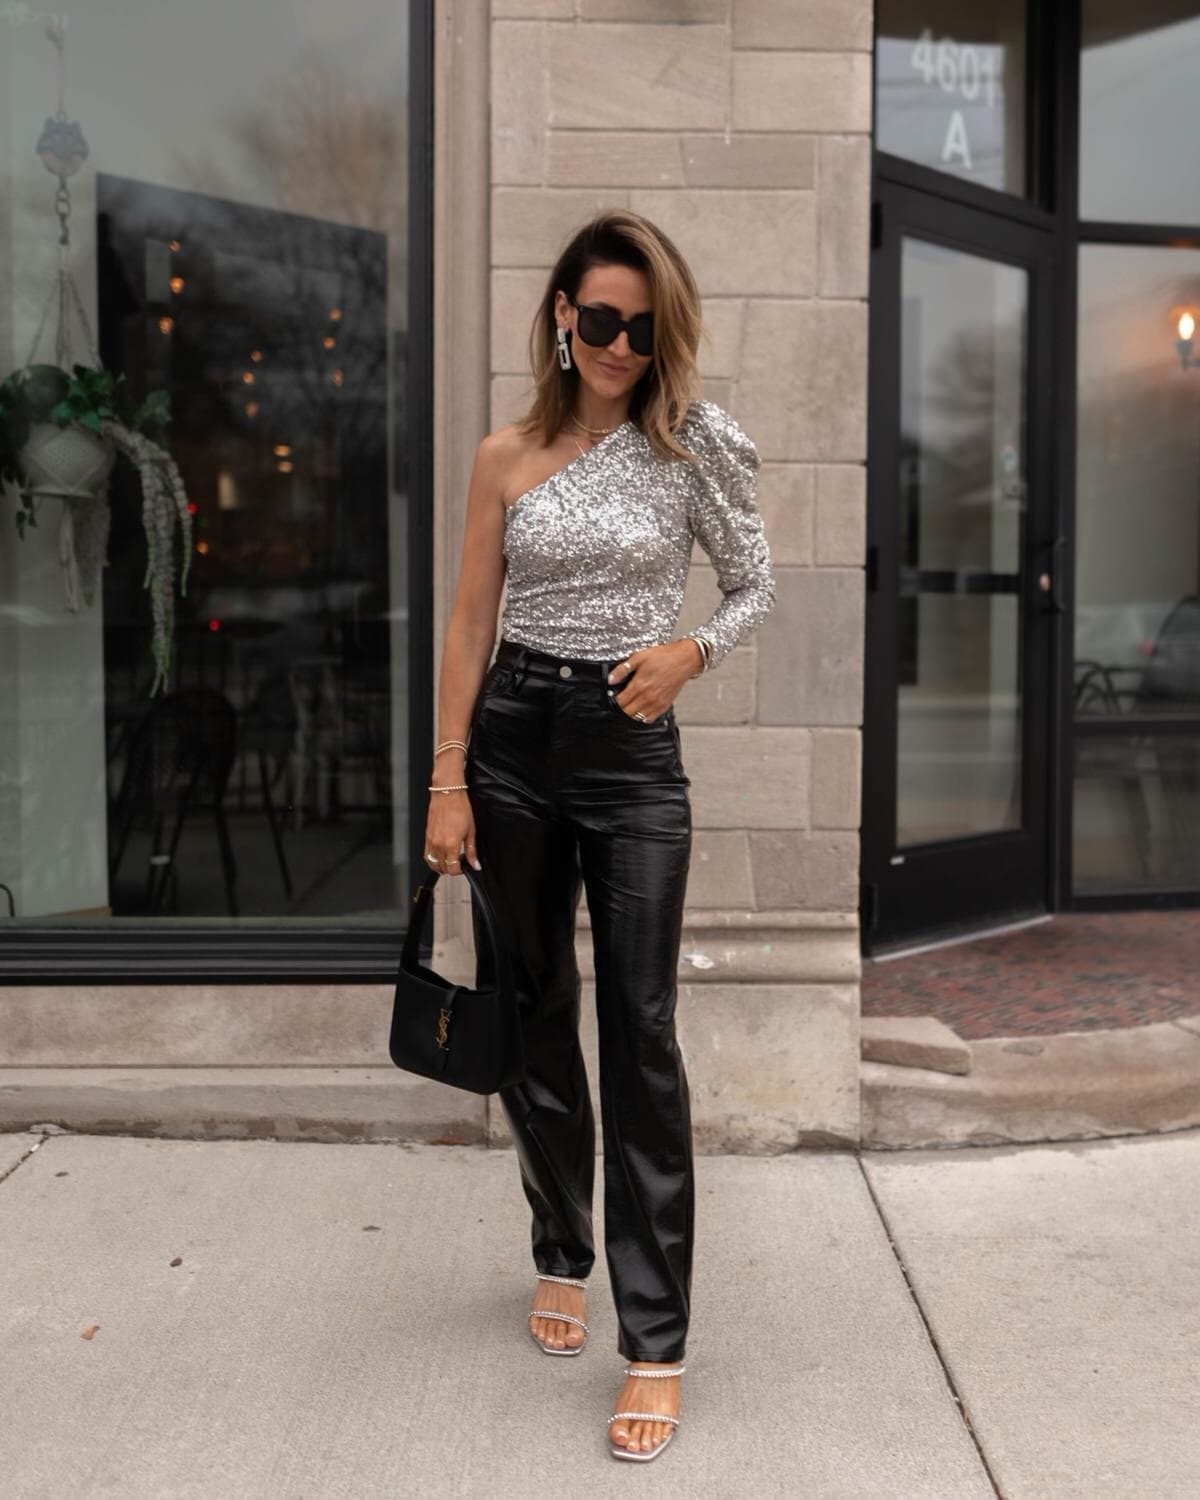 Karina wears Express Faux leather pant and sequin top - Karina Style Diaries